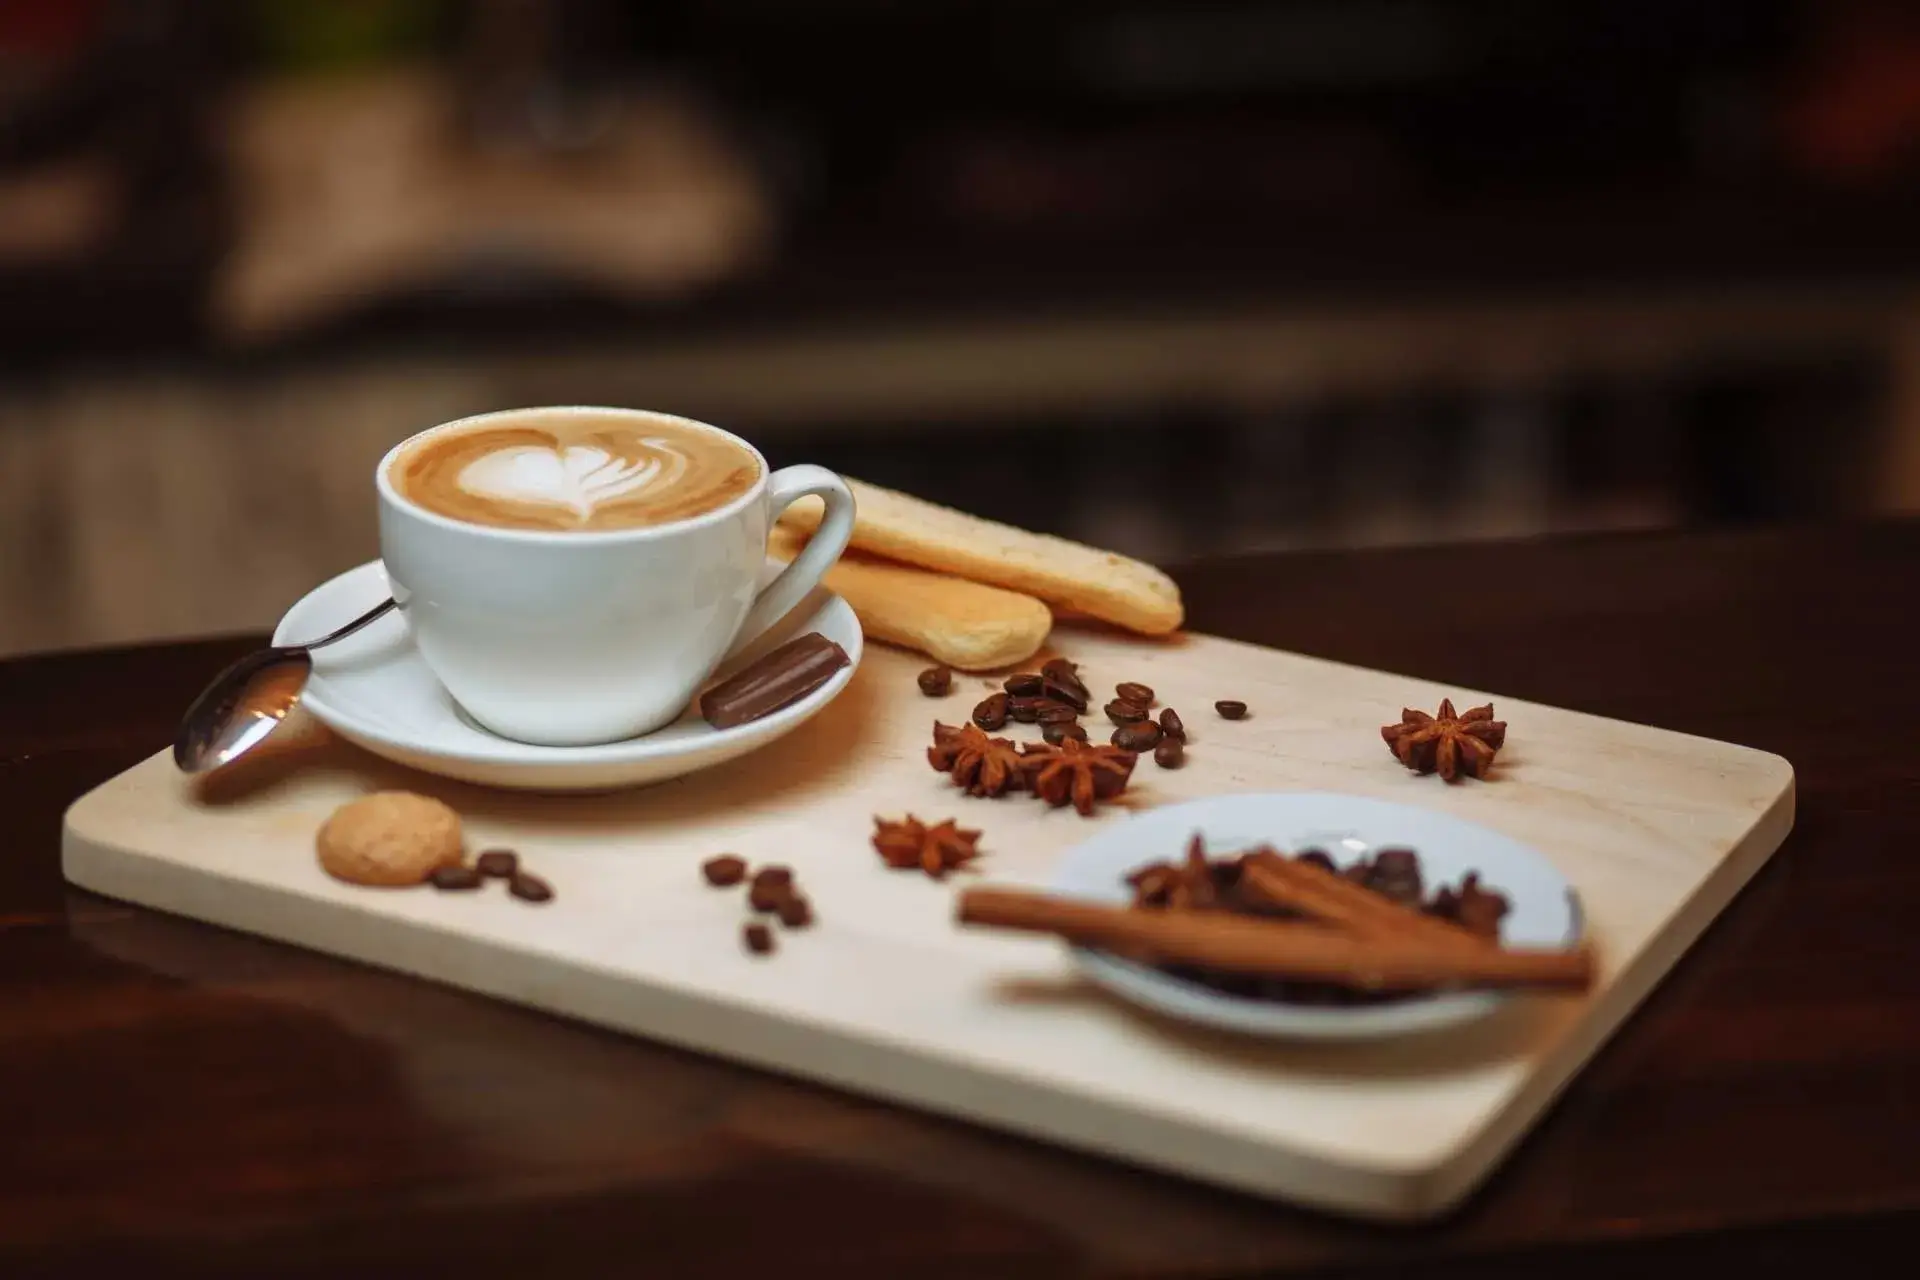 A cup of coffee and some cookies on a tray